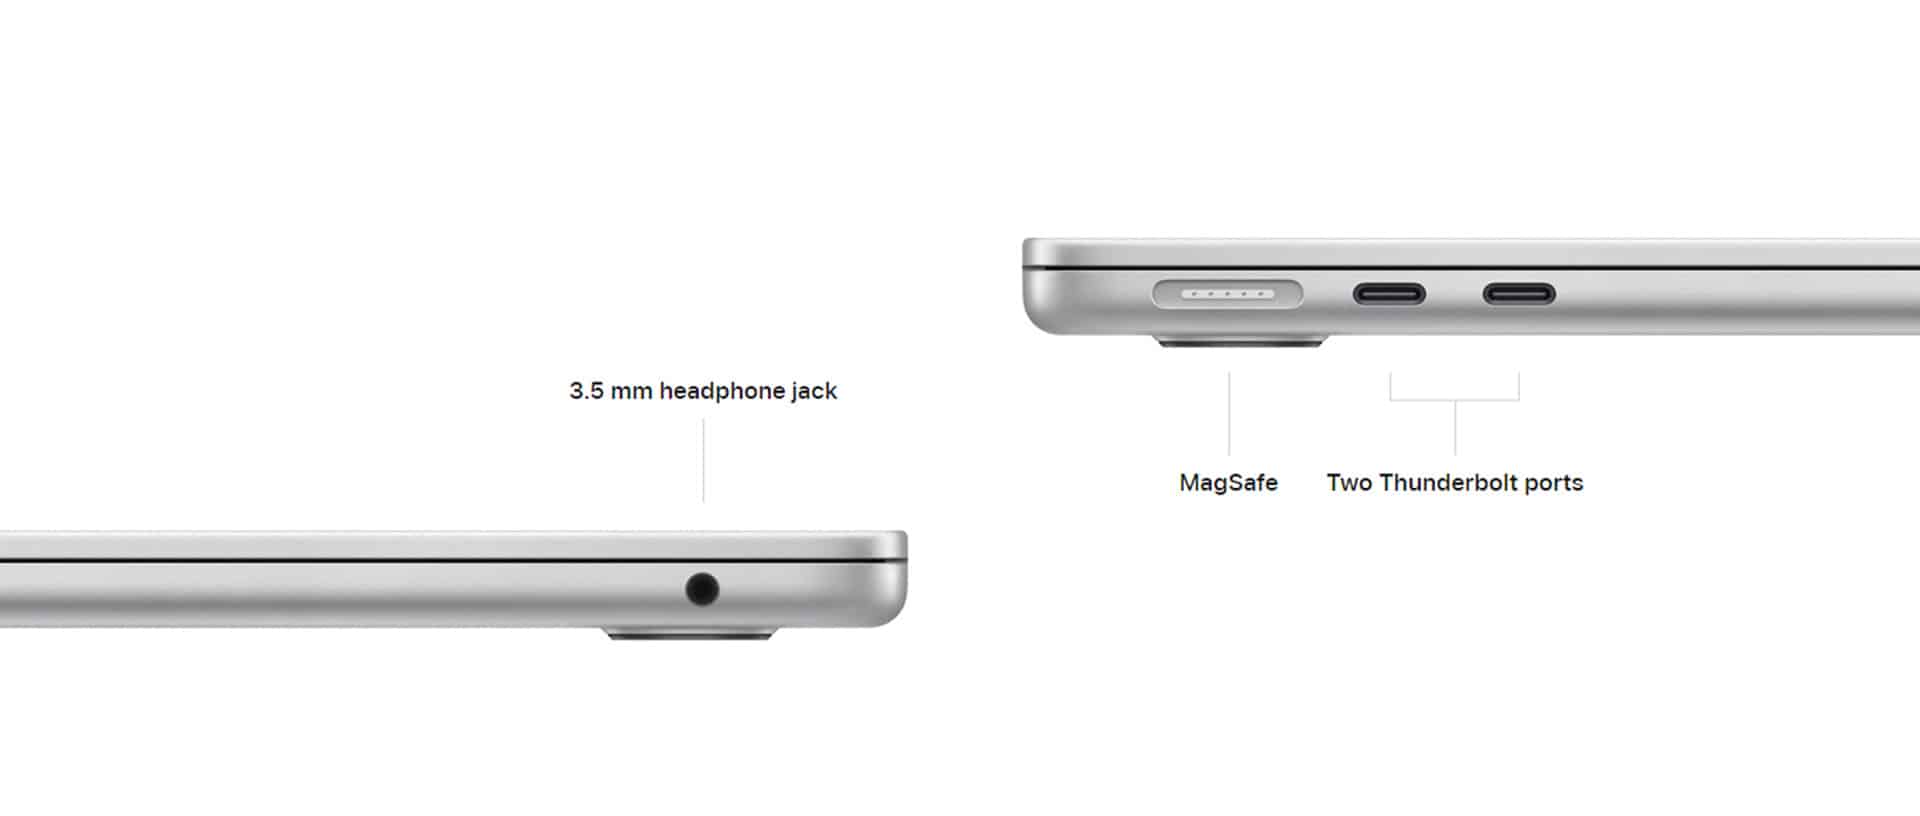 15-inch MacBook Air features, specs and price - iGeeksBlog